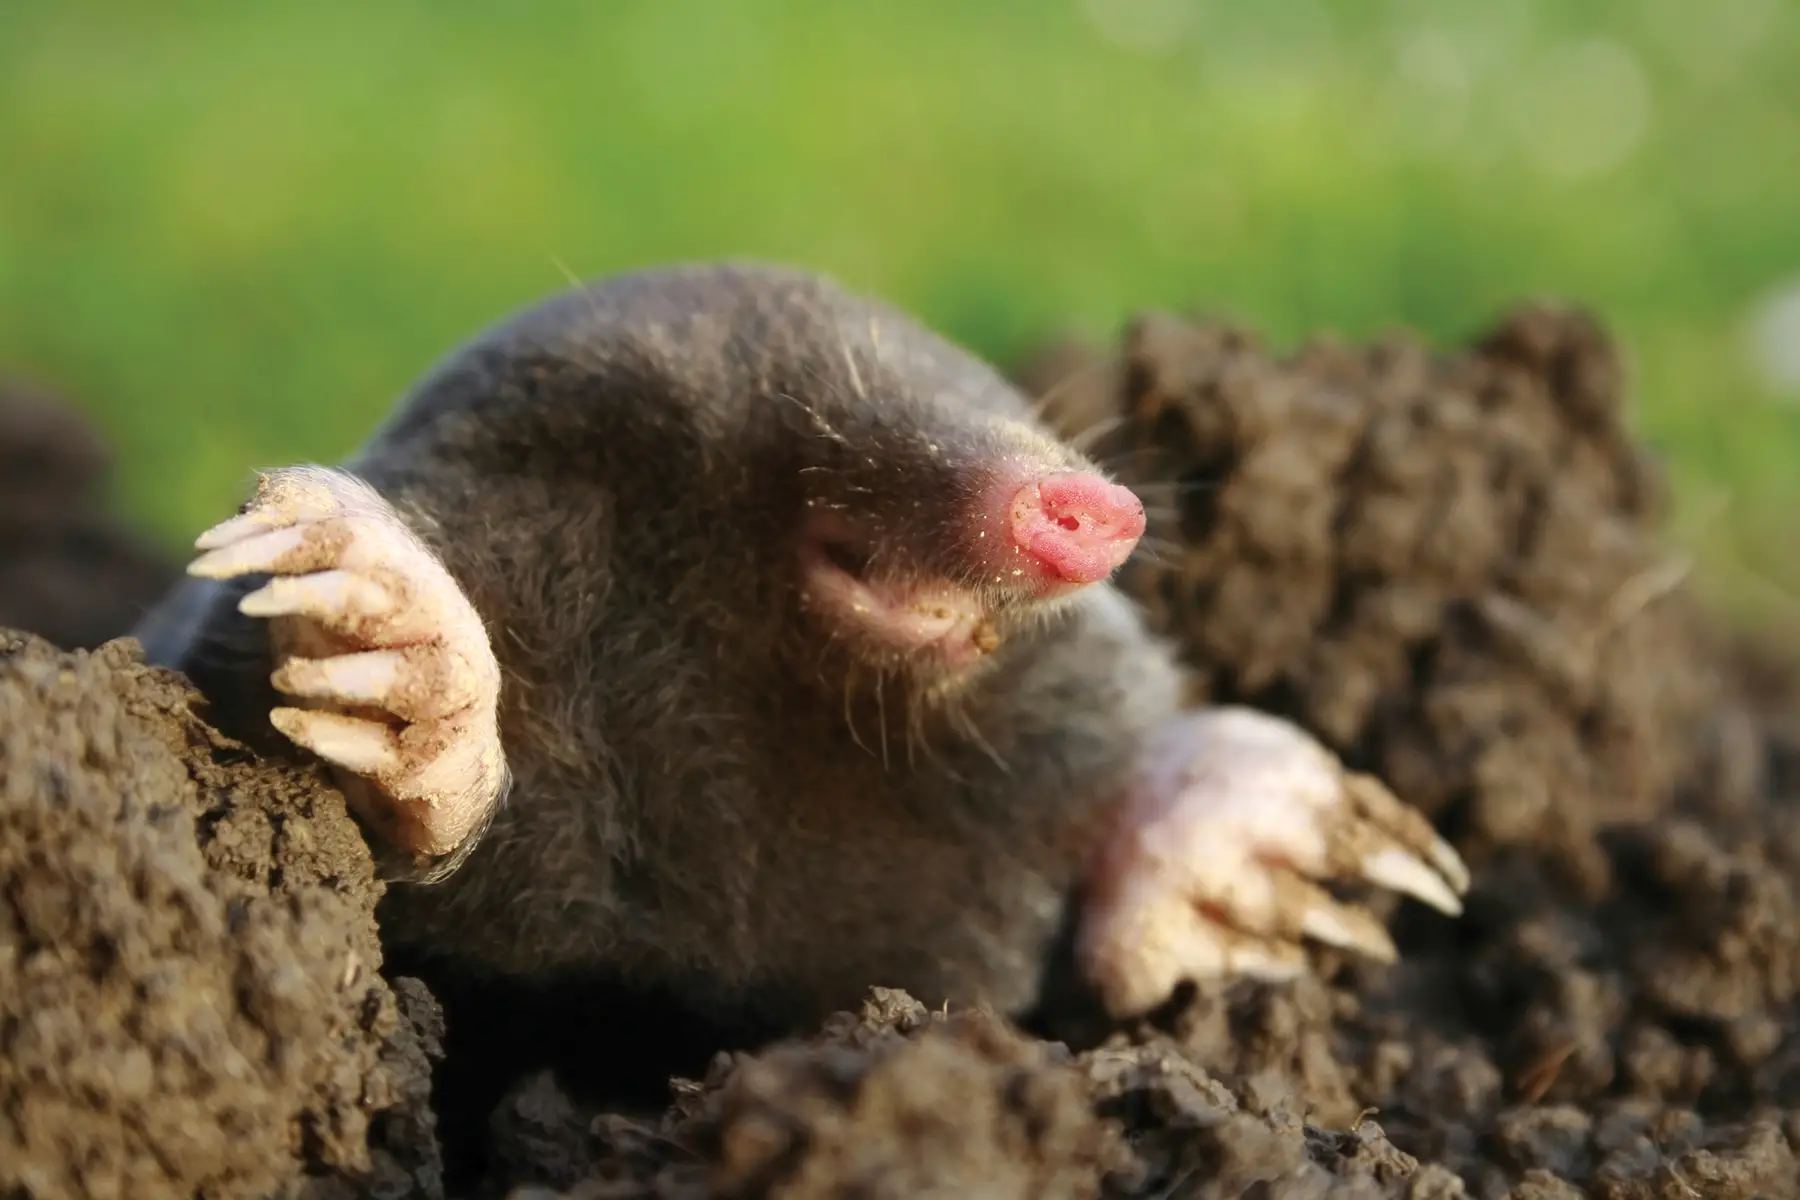 Are Moles Dangerous Animals? - Know the Risks Before Interacting With These  Rodents